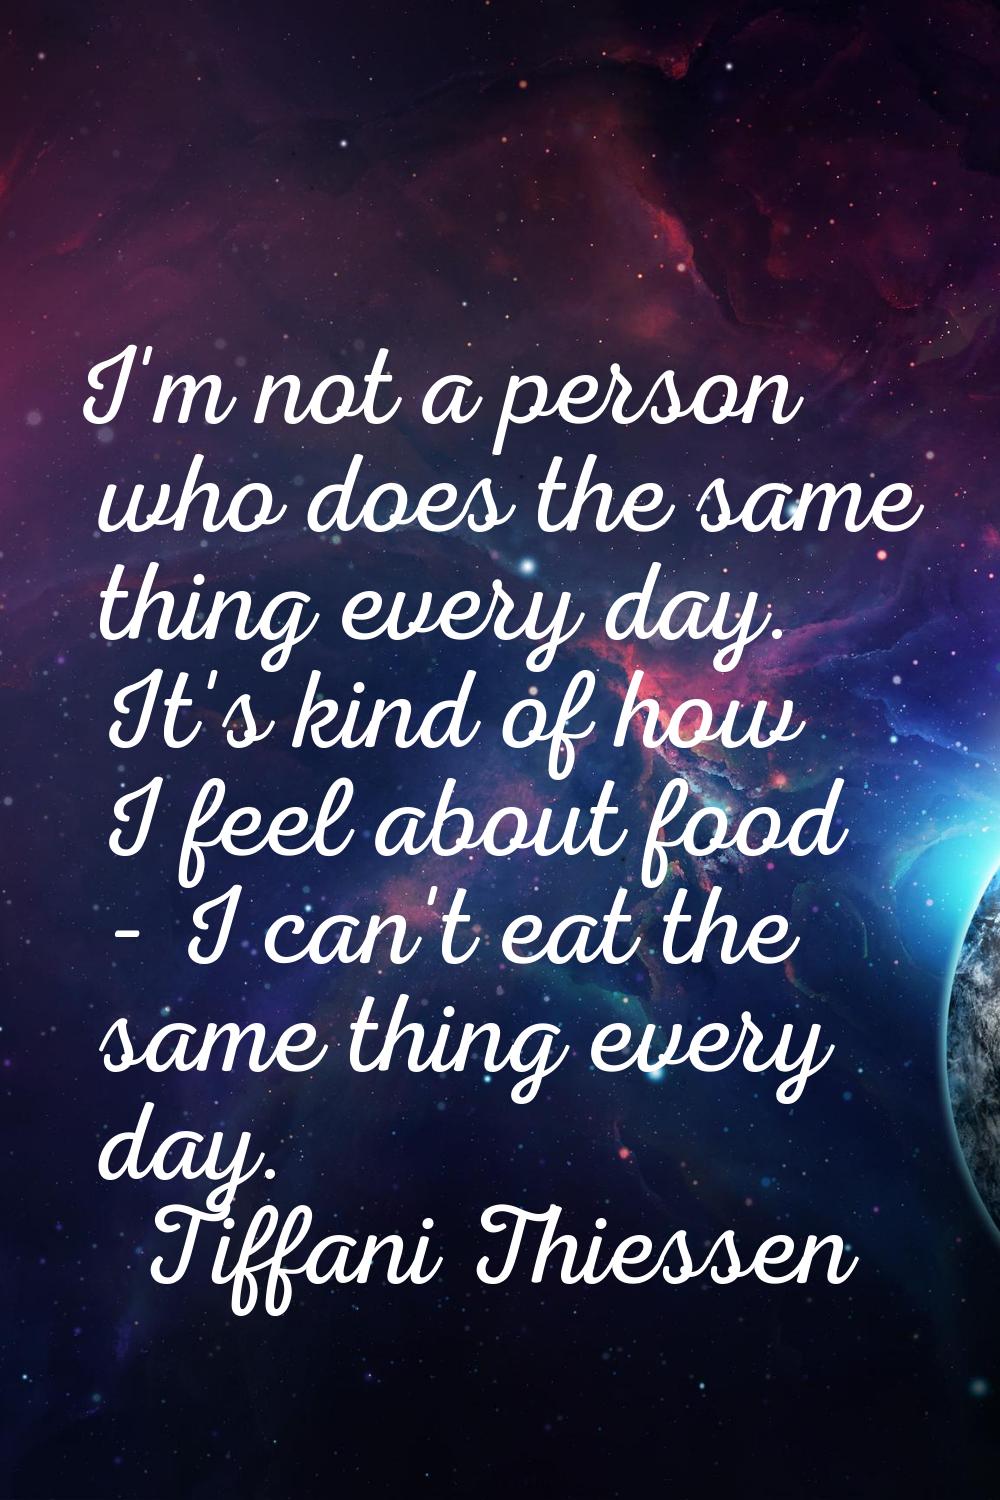 I'm not a person who does the same thing every day. It's kind of how I feel about food - I can't ea